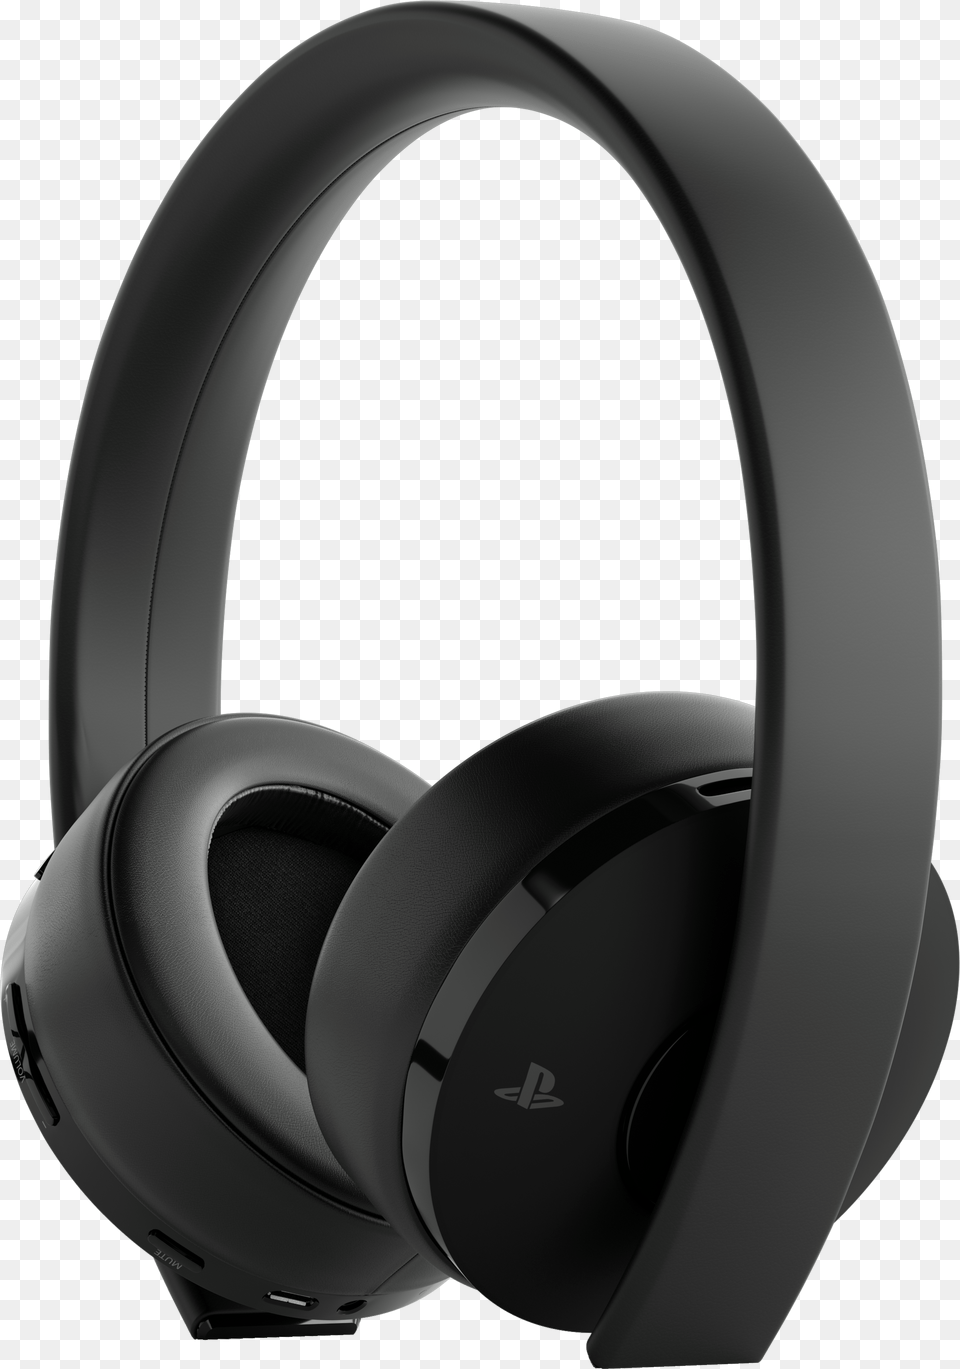 Playstation 4 New Gold Wireless Headset Black Best Bluetooth Headphones Bass, Electronics Png Image